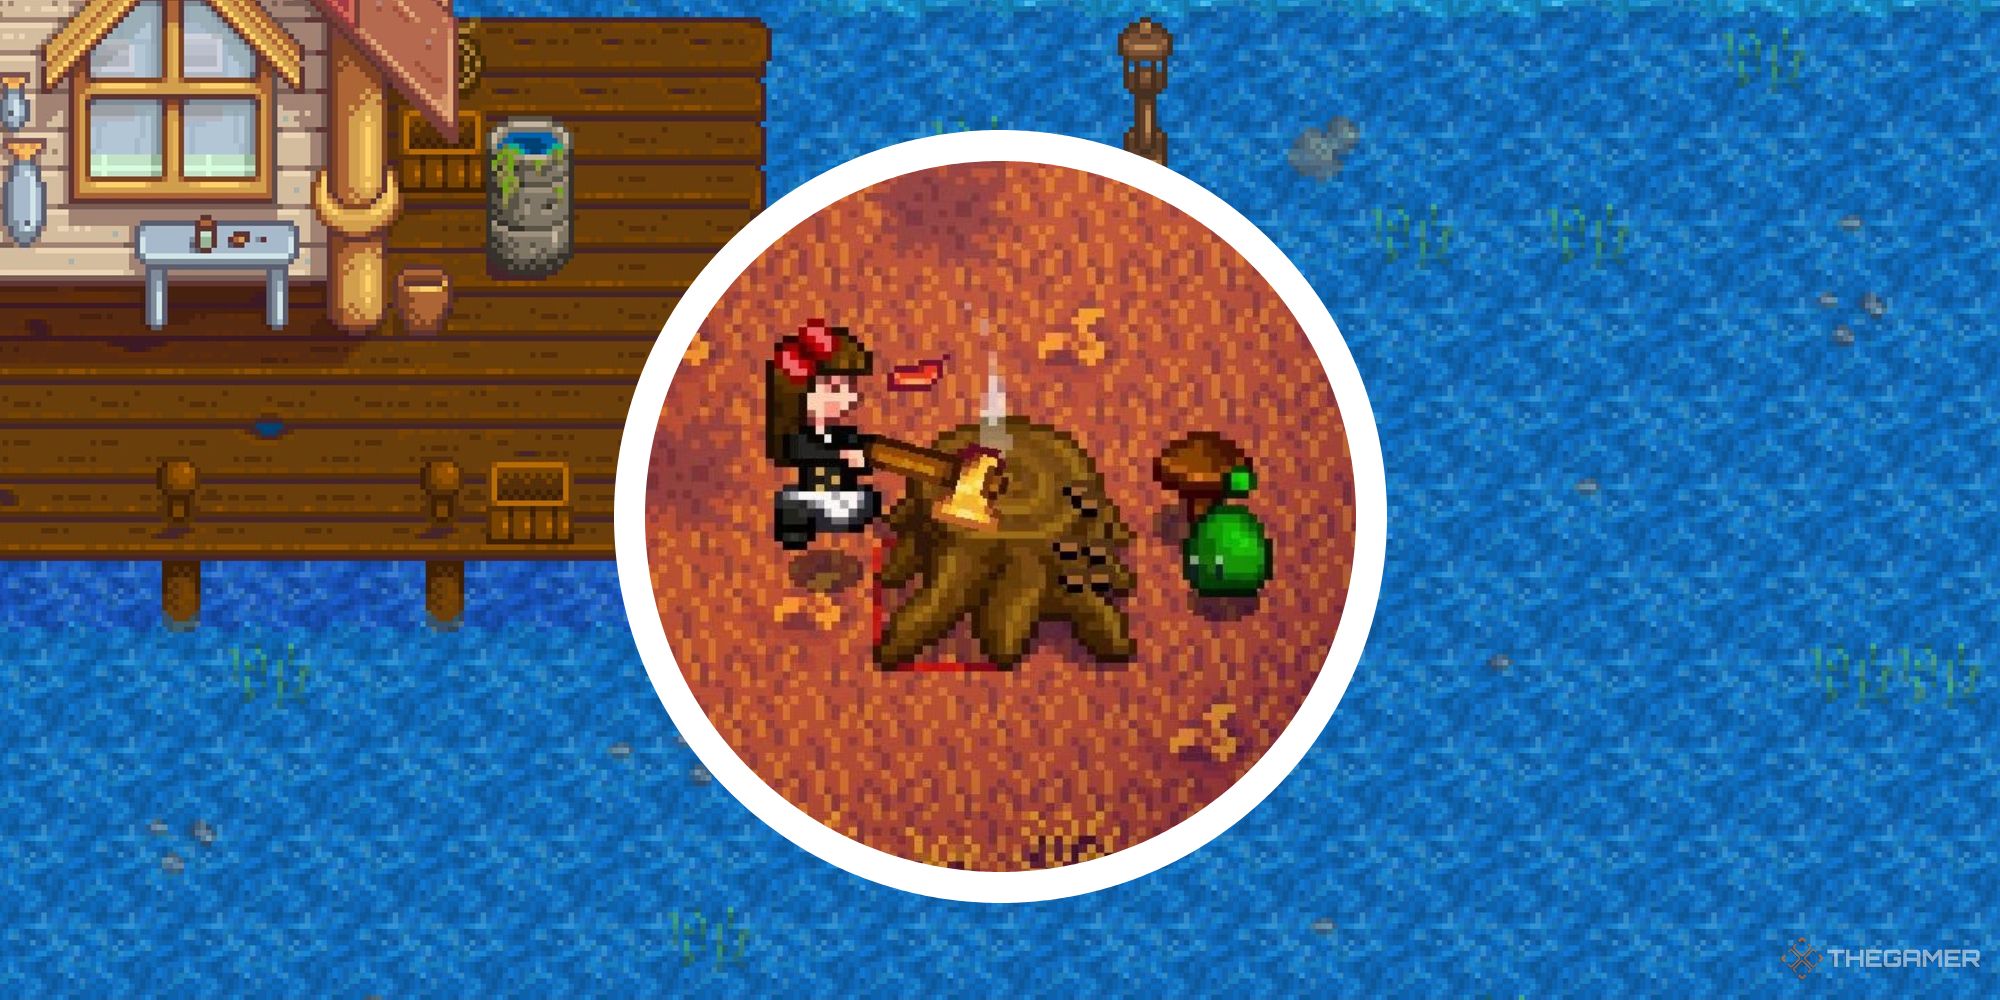 stardew valley image of ocean with circle image of player chopping stump-1